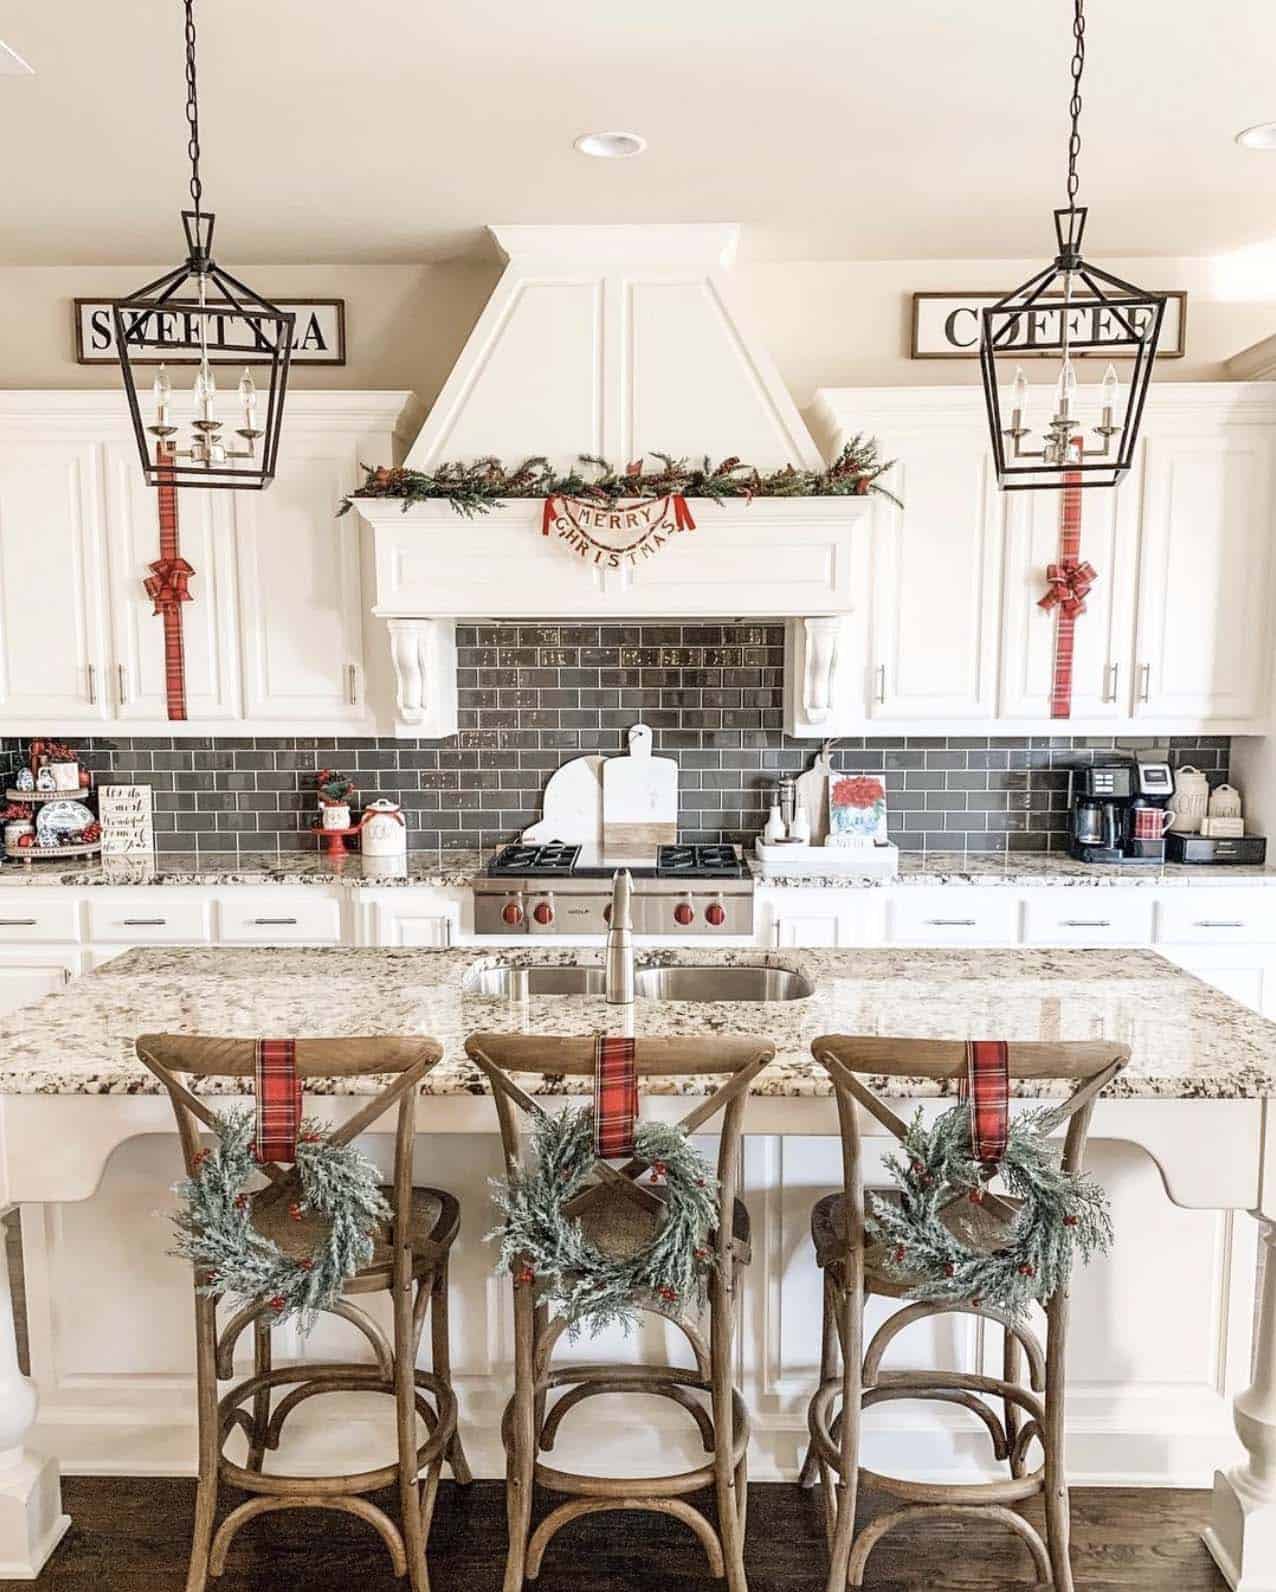 farmhouse-style-kitchen-decorated-for-kitchen-with-wreaths-on-the-chair-backs